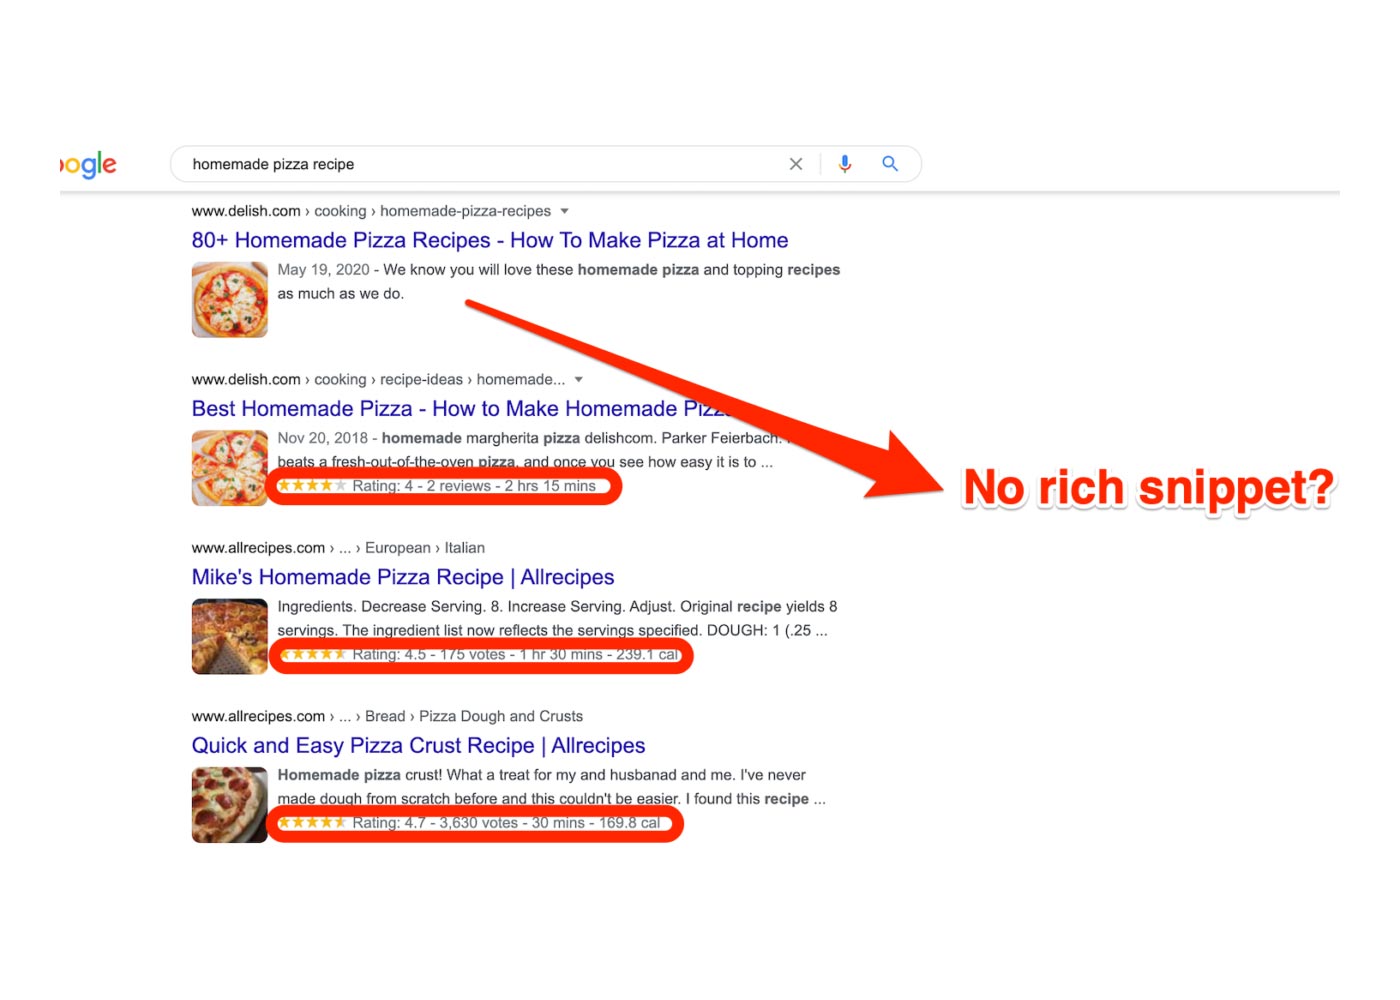 How to Get Rich Snippets